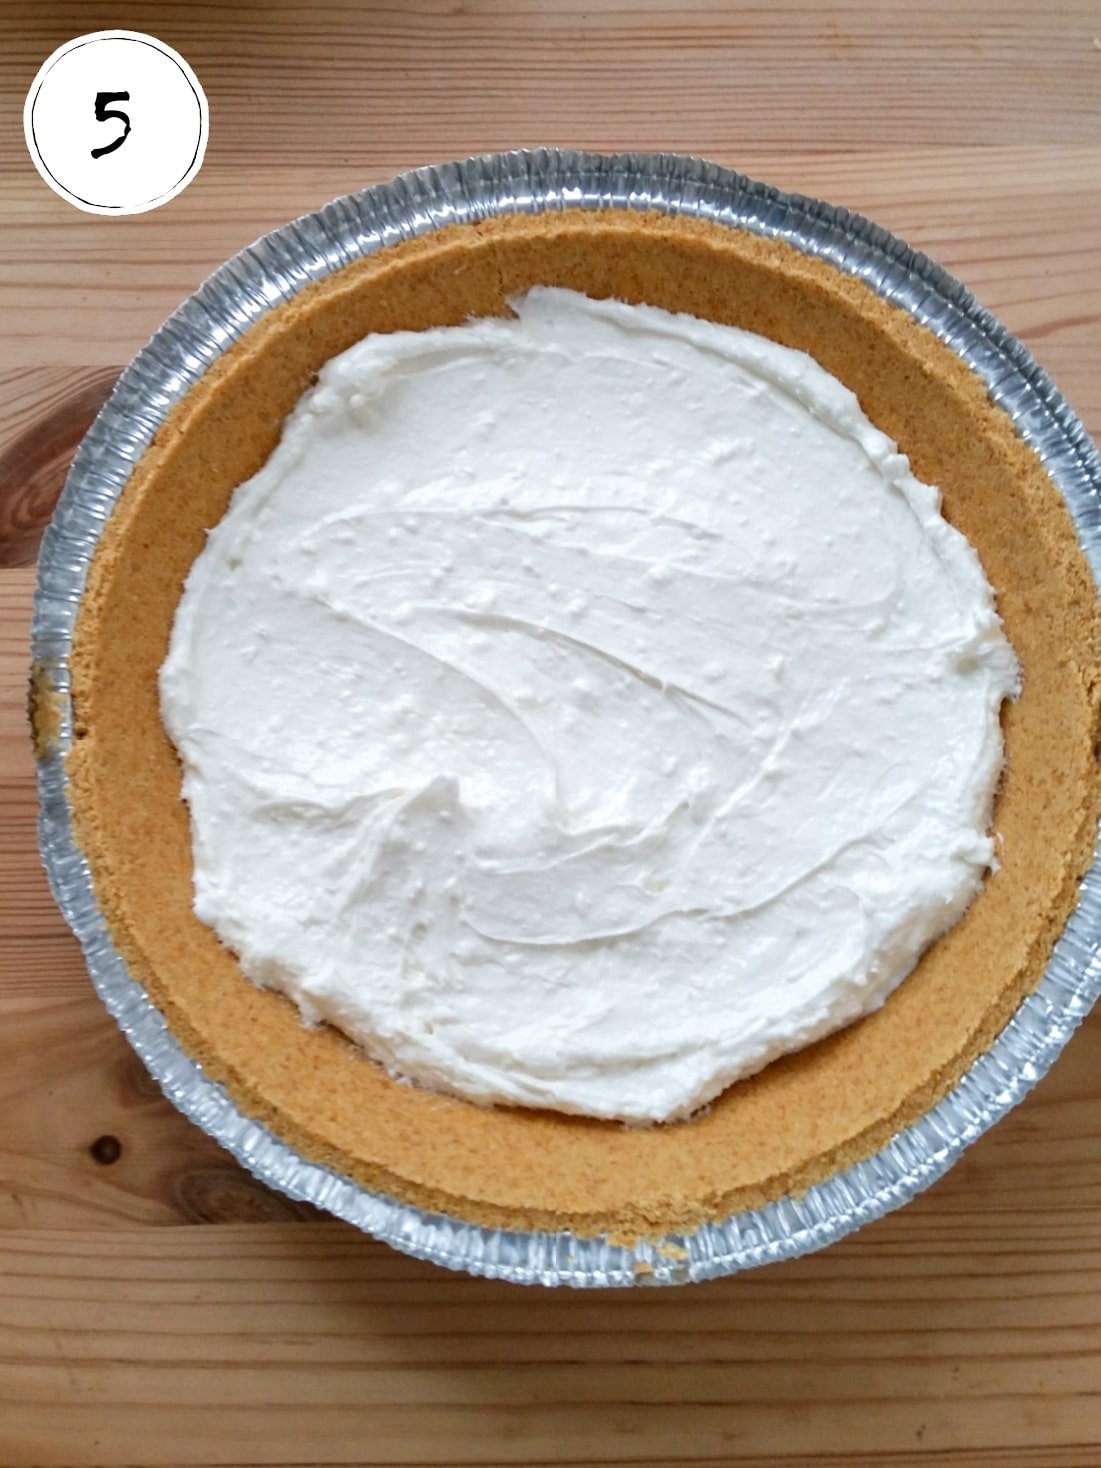 Adding sugar, cream cheese and whipped topping layer to pie crust.